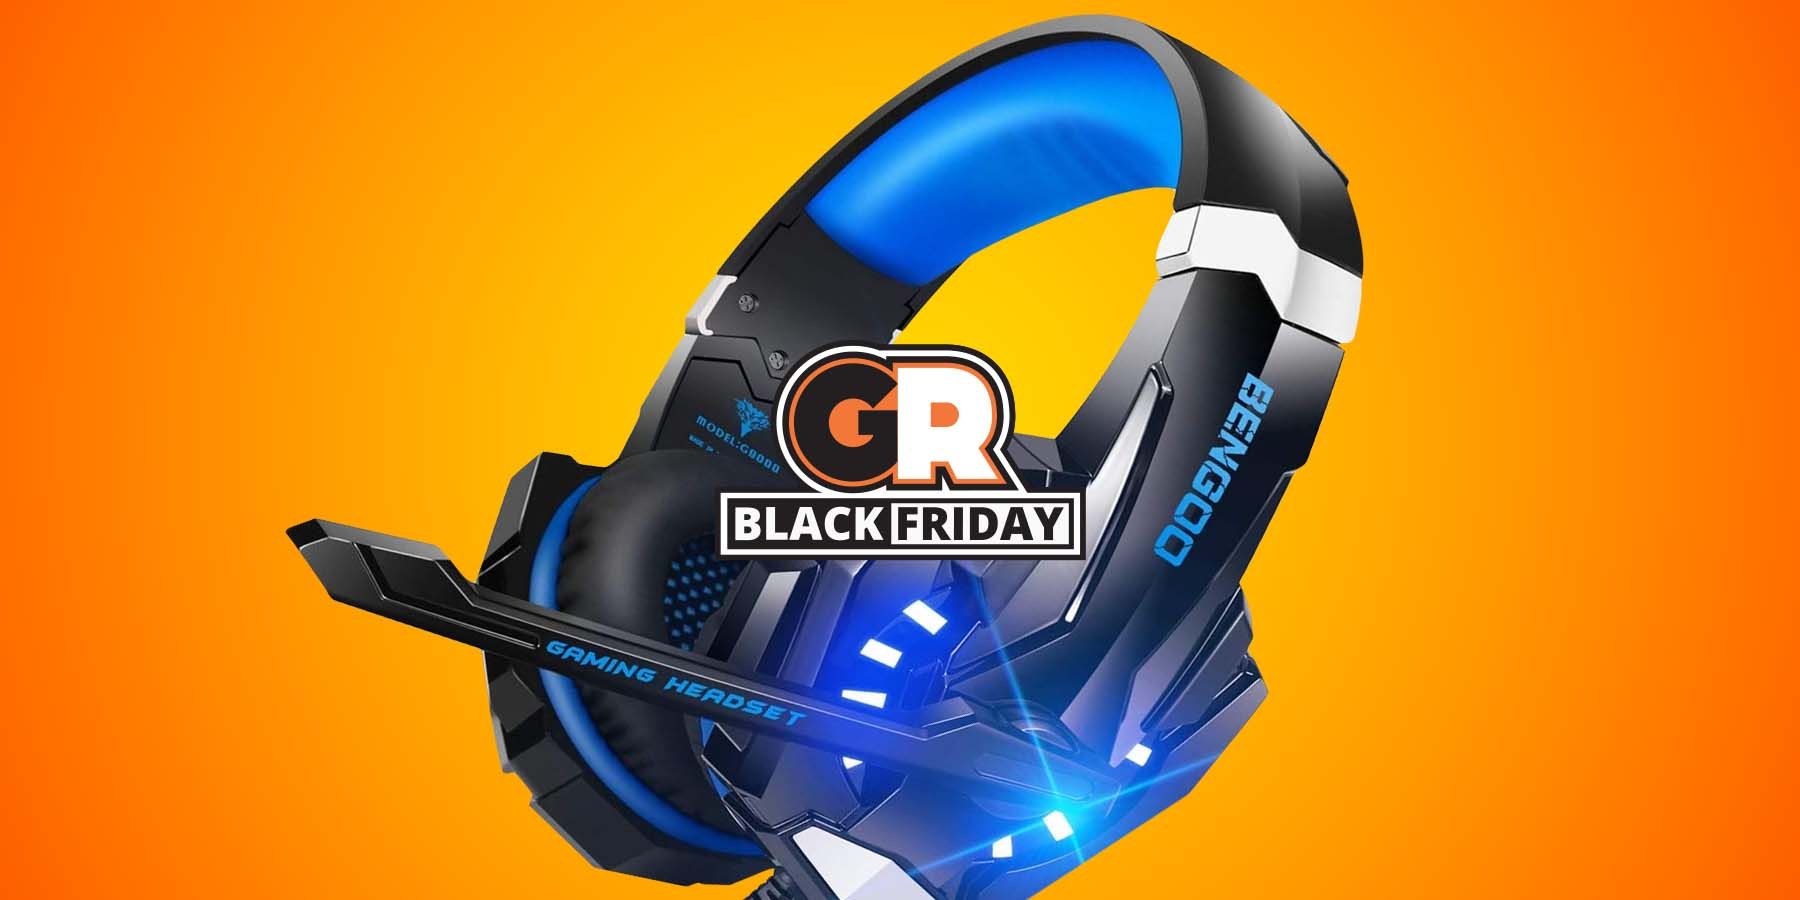 Black Friday Deal Lets You Get 54% off BENGOO G9000 Stereo Gaming Headset for PC, PS4, and Xbox